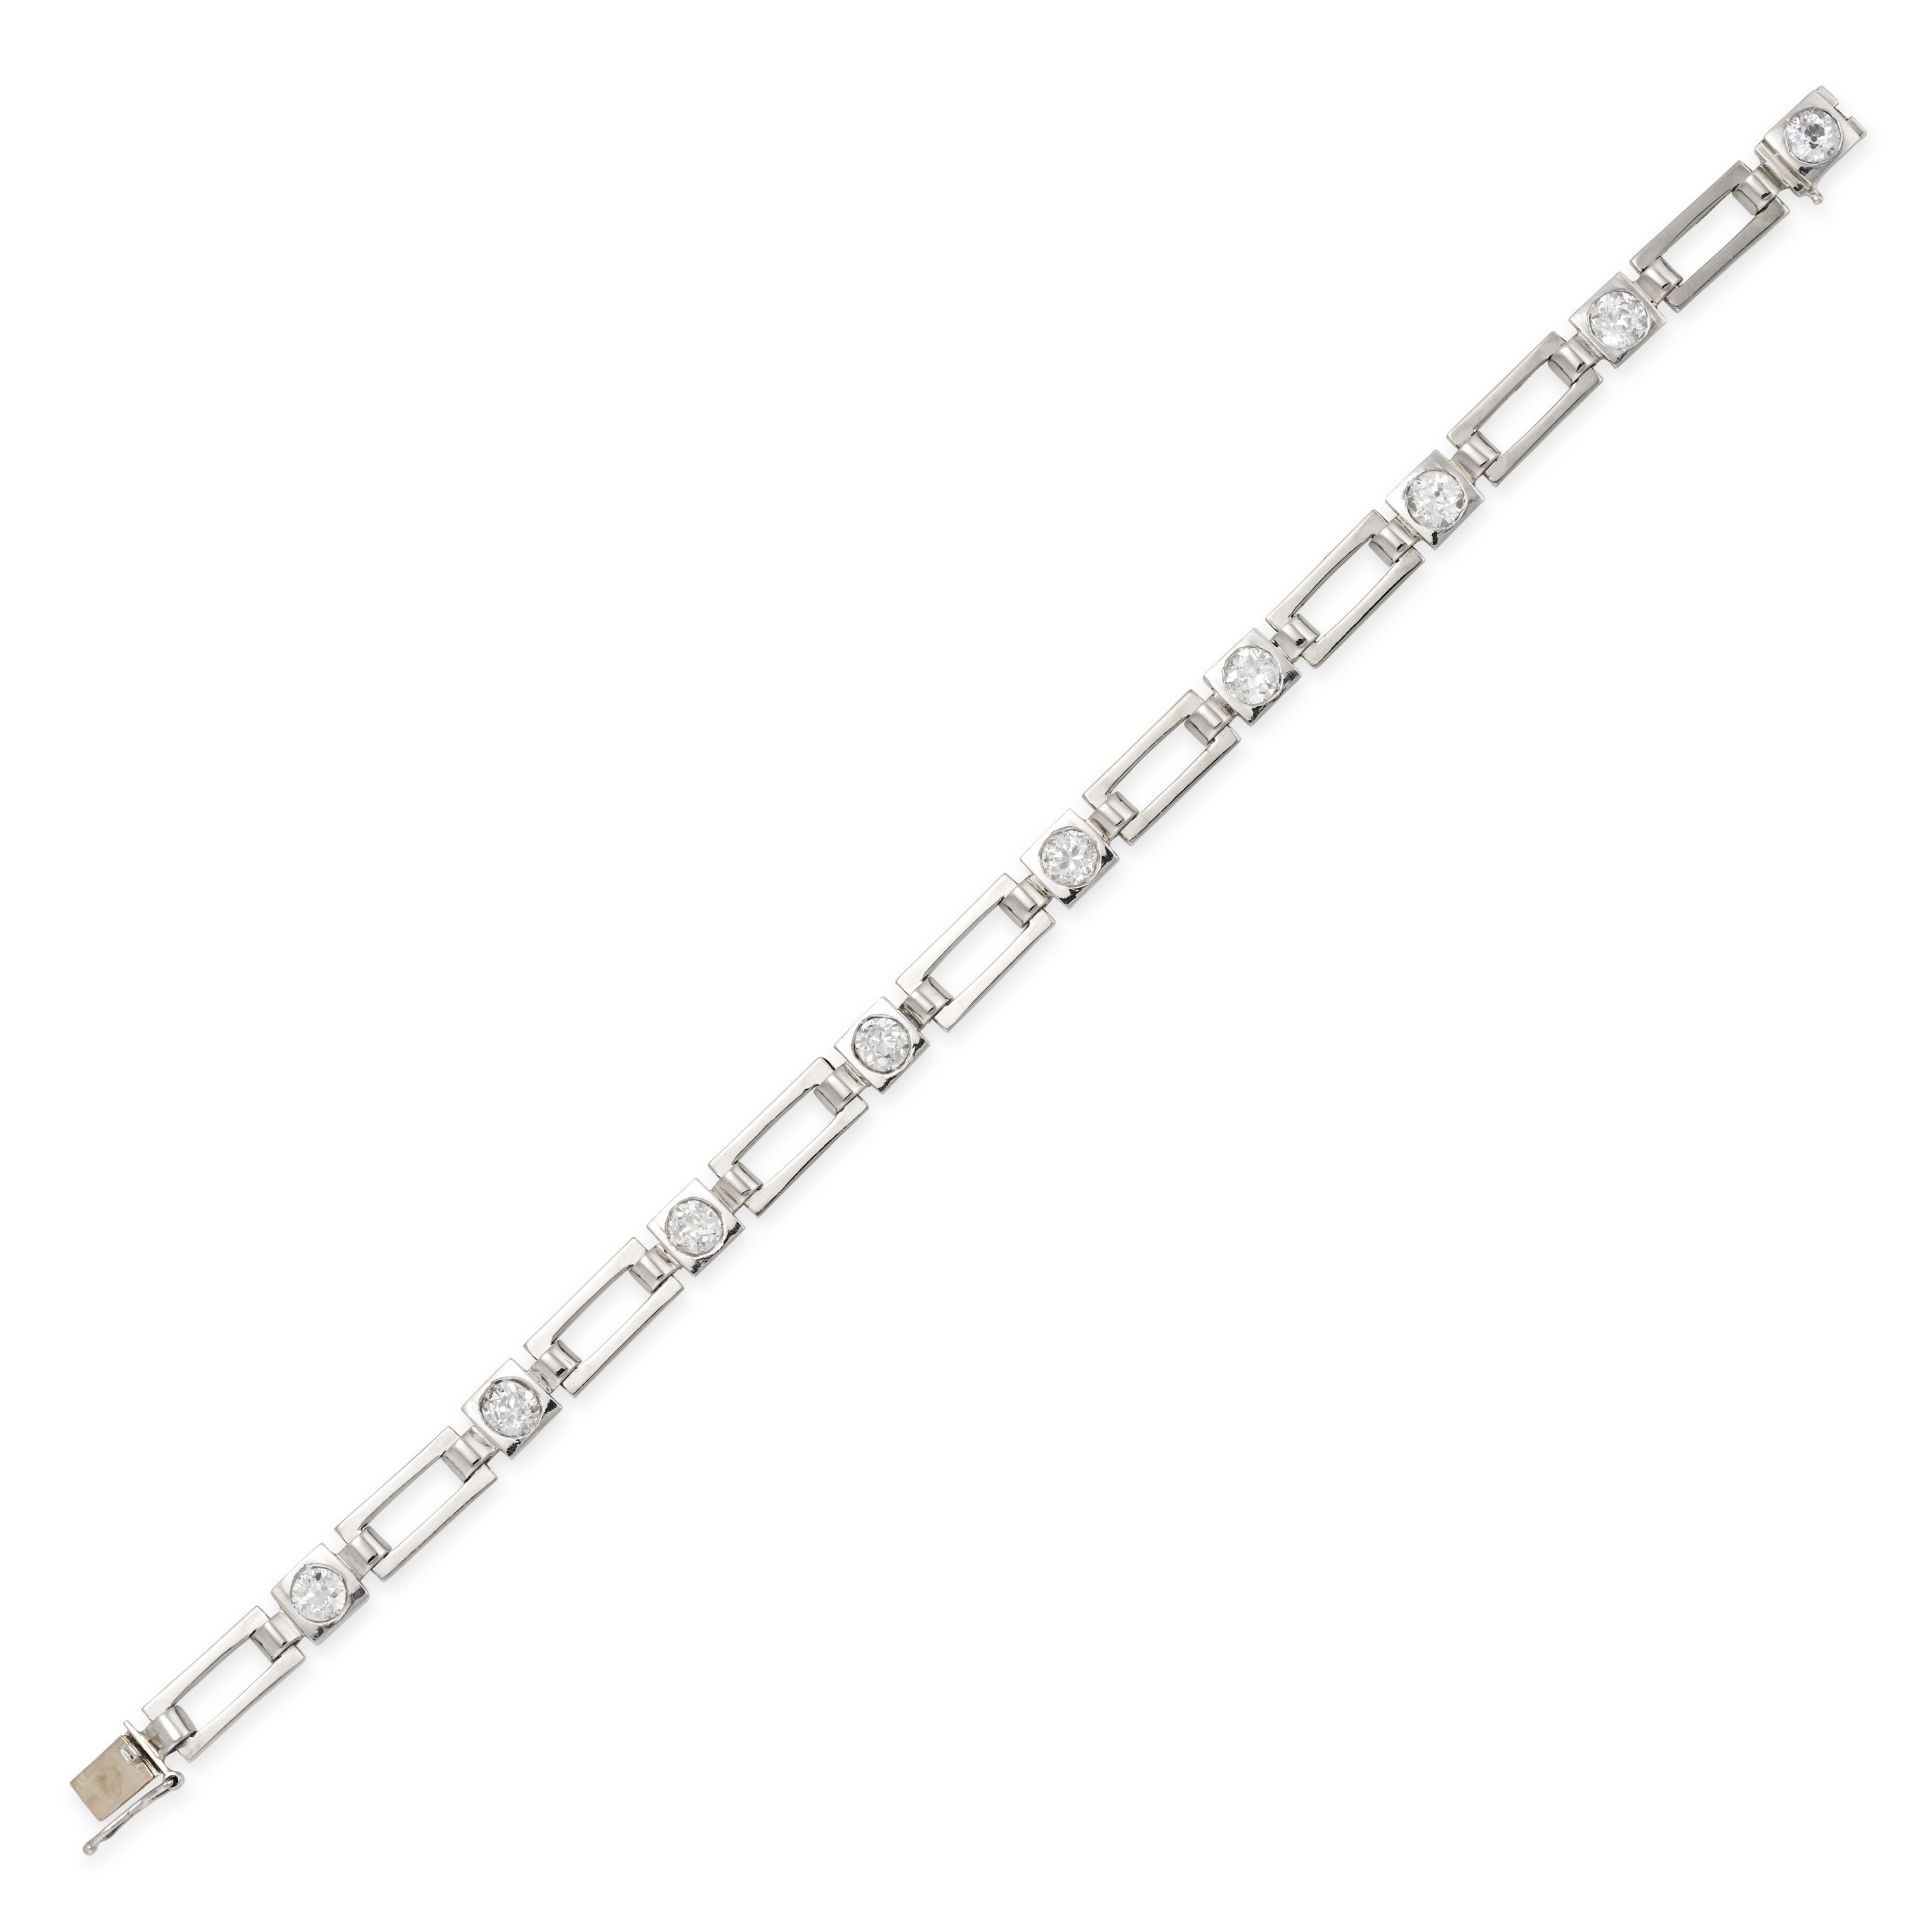 A DIAMOND BRACELET in 14ct white gold, comprising a row of openwork links accented by old Europea...